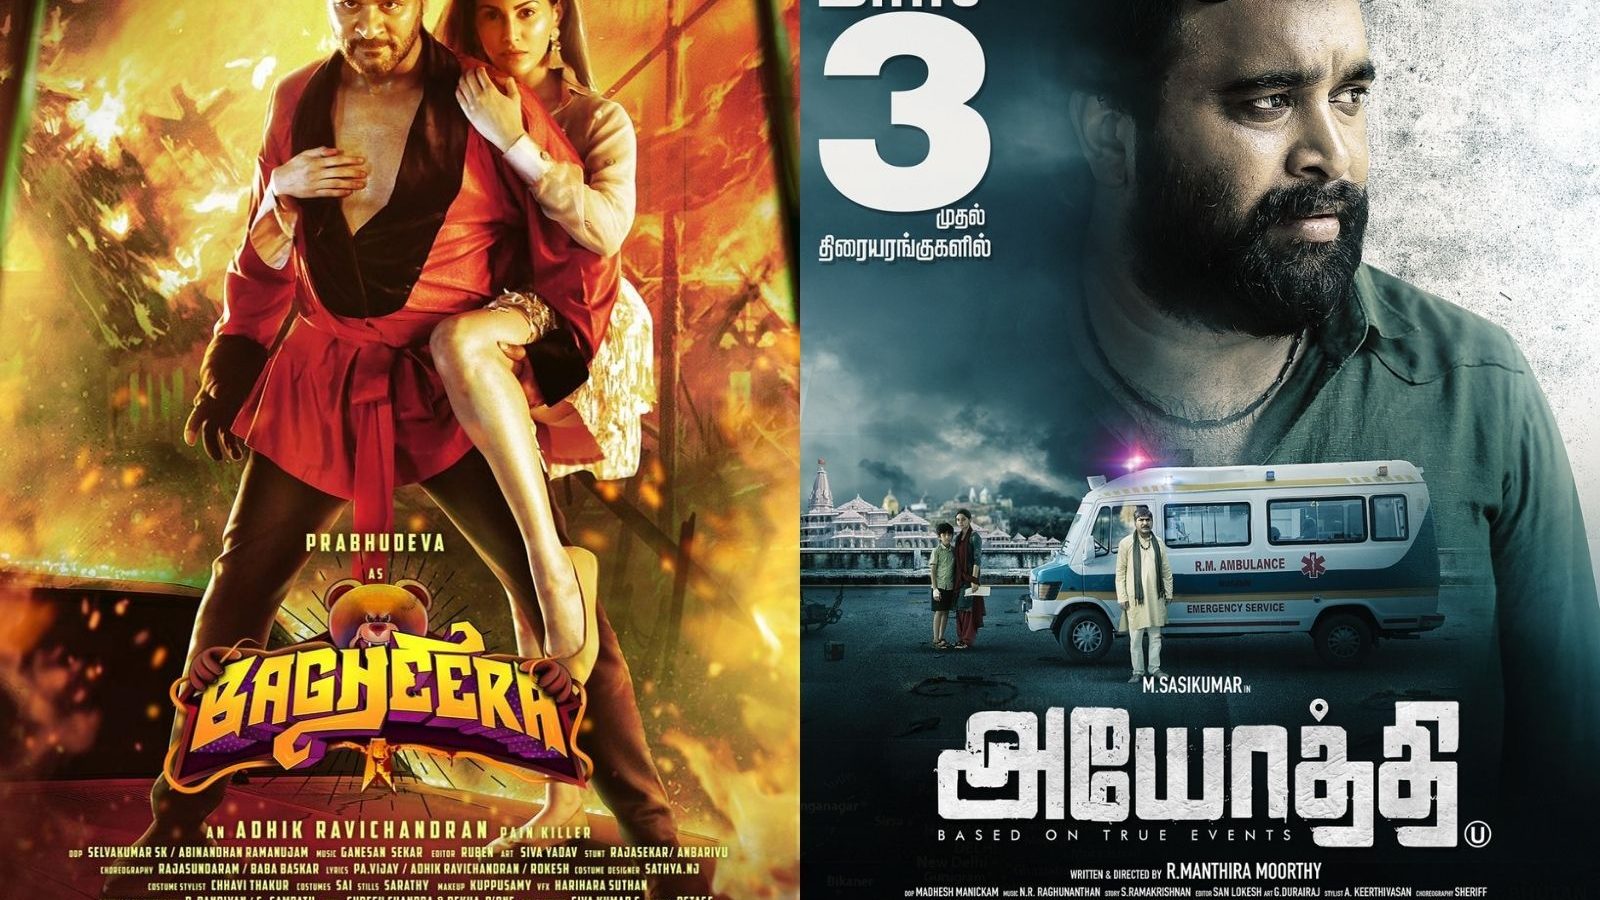 From Kadua to Ayodhya...a list of Tamil films releasing in theaters